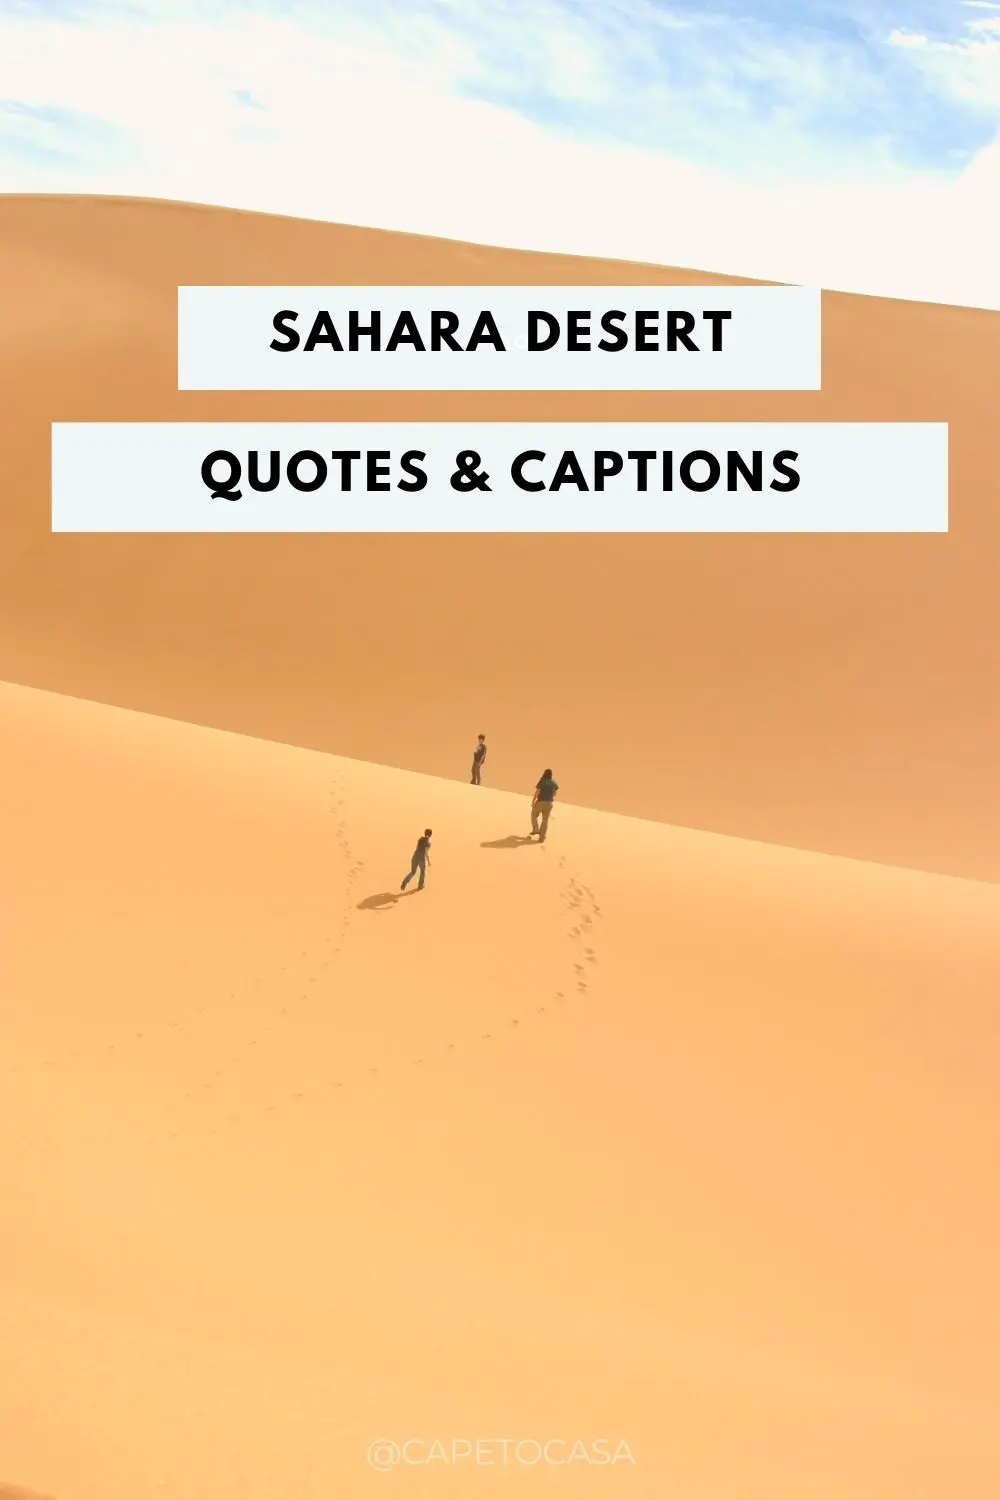 desert captions and quotes